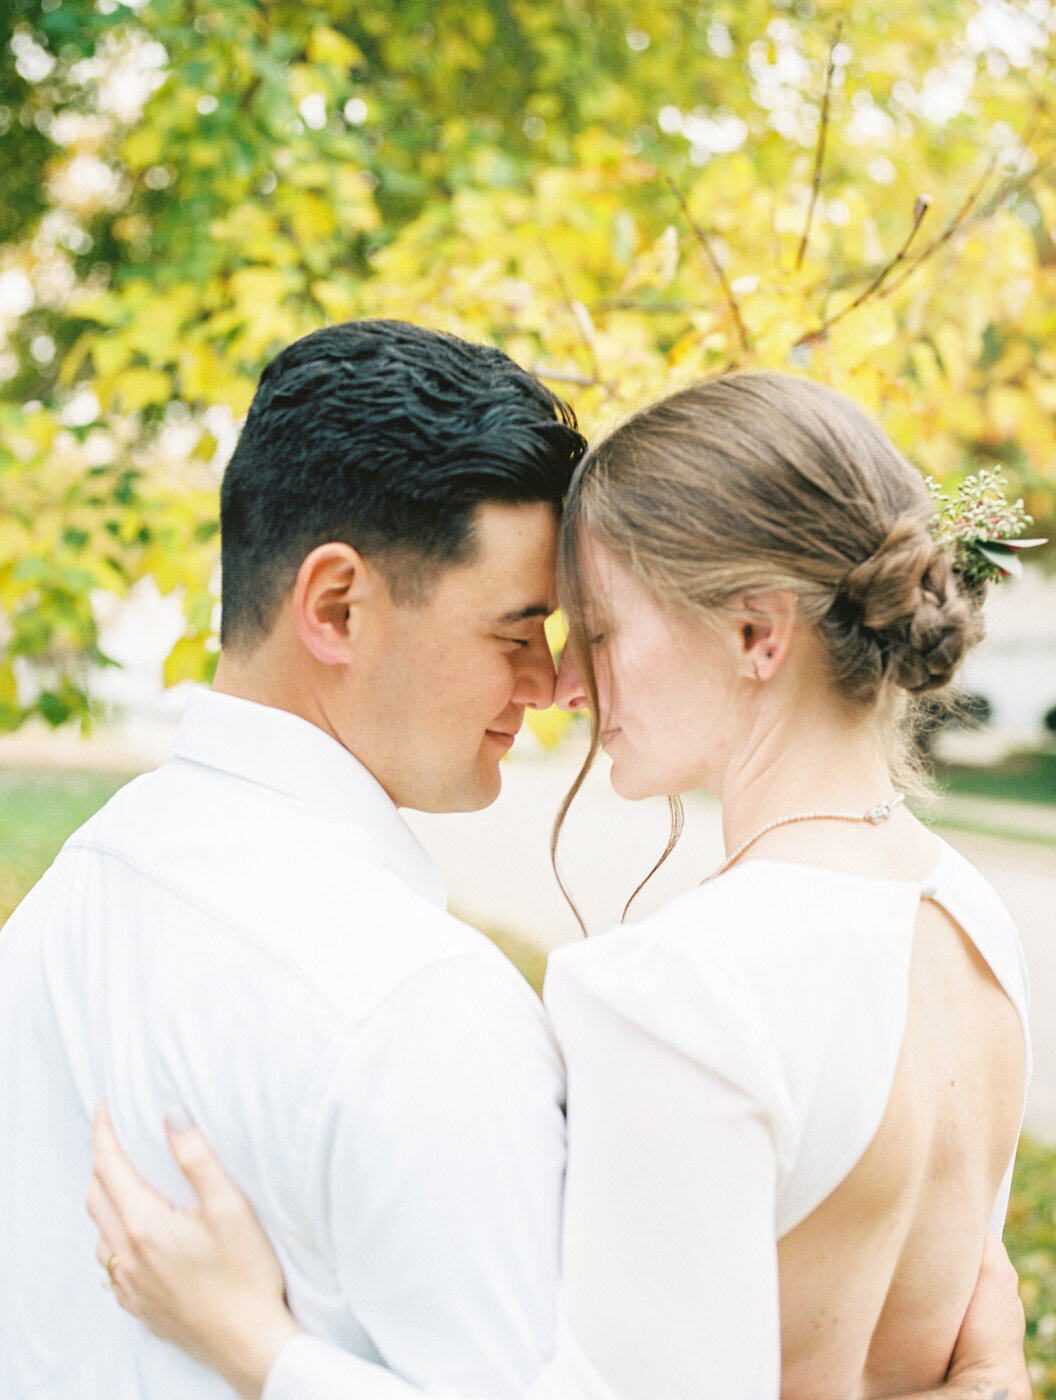 Raleigh Event Elopement Photographer | Jessica Agee Photography - 015